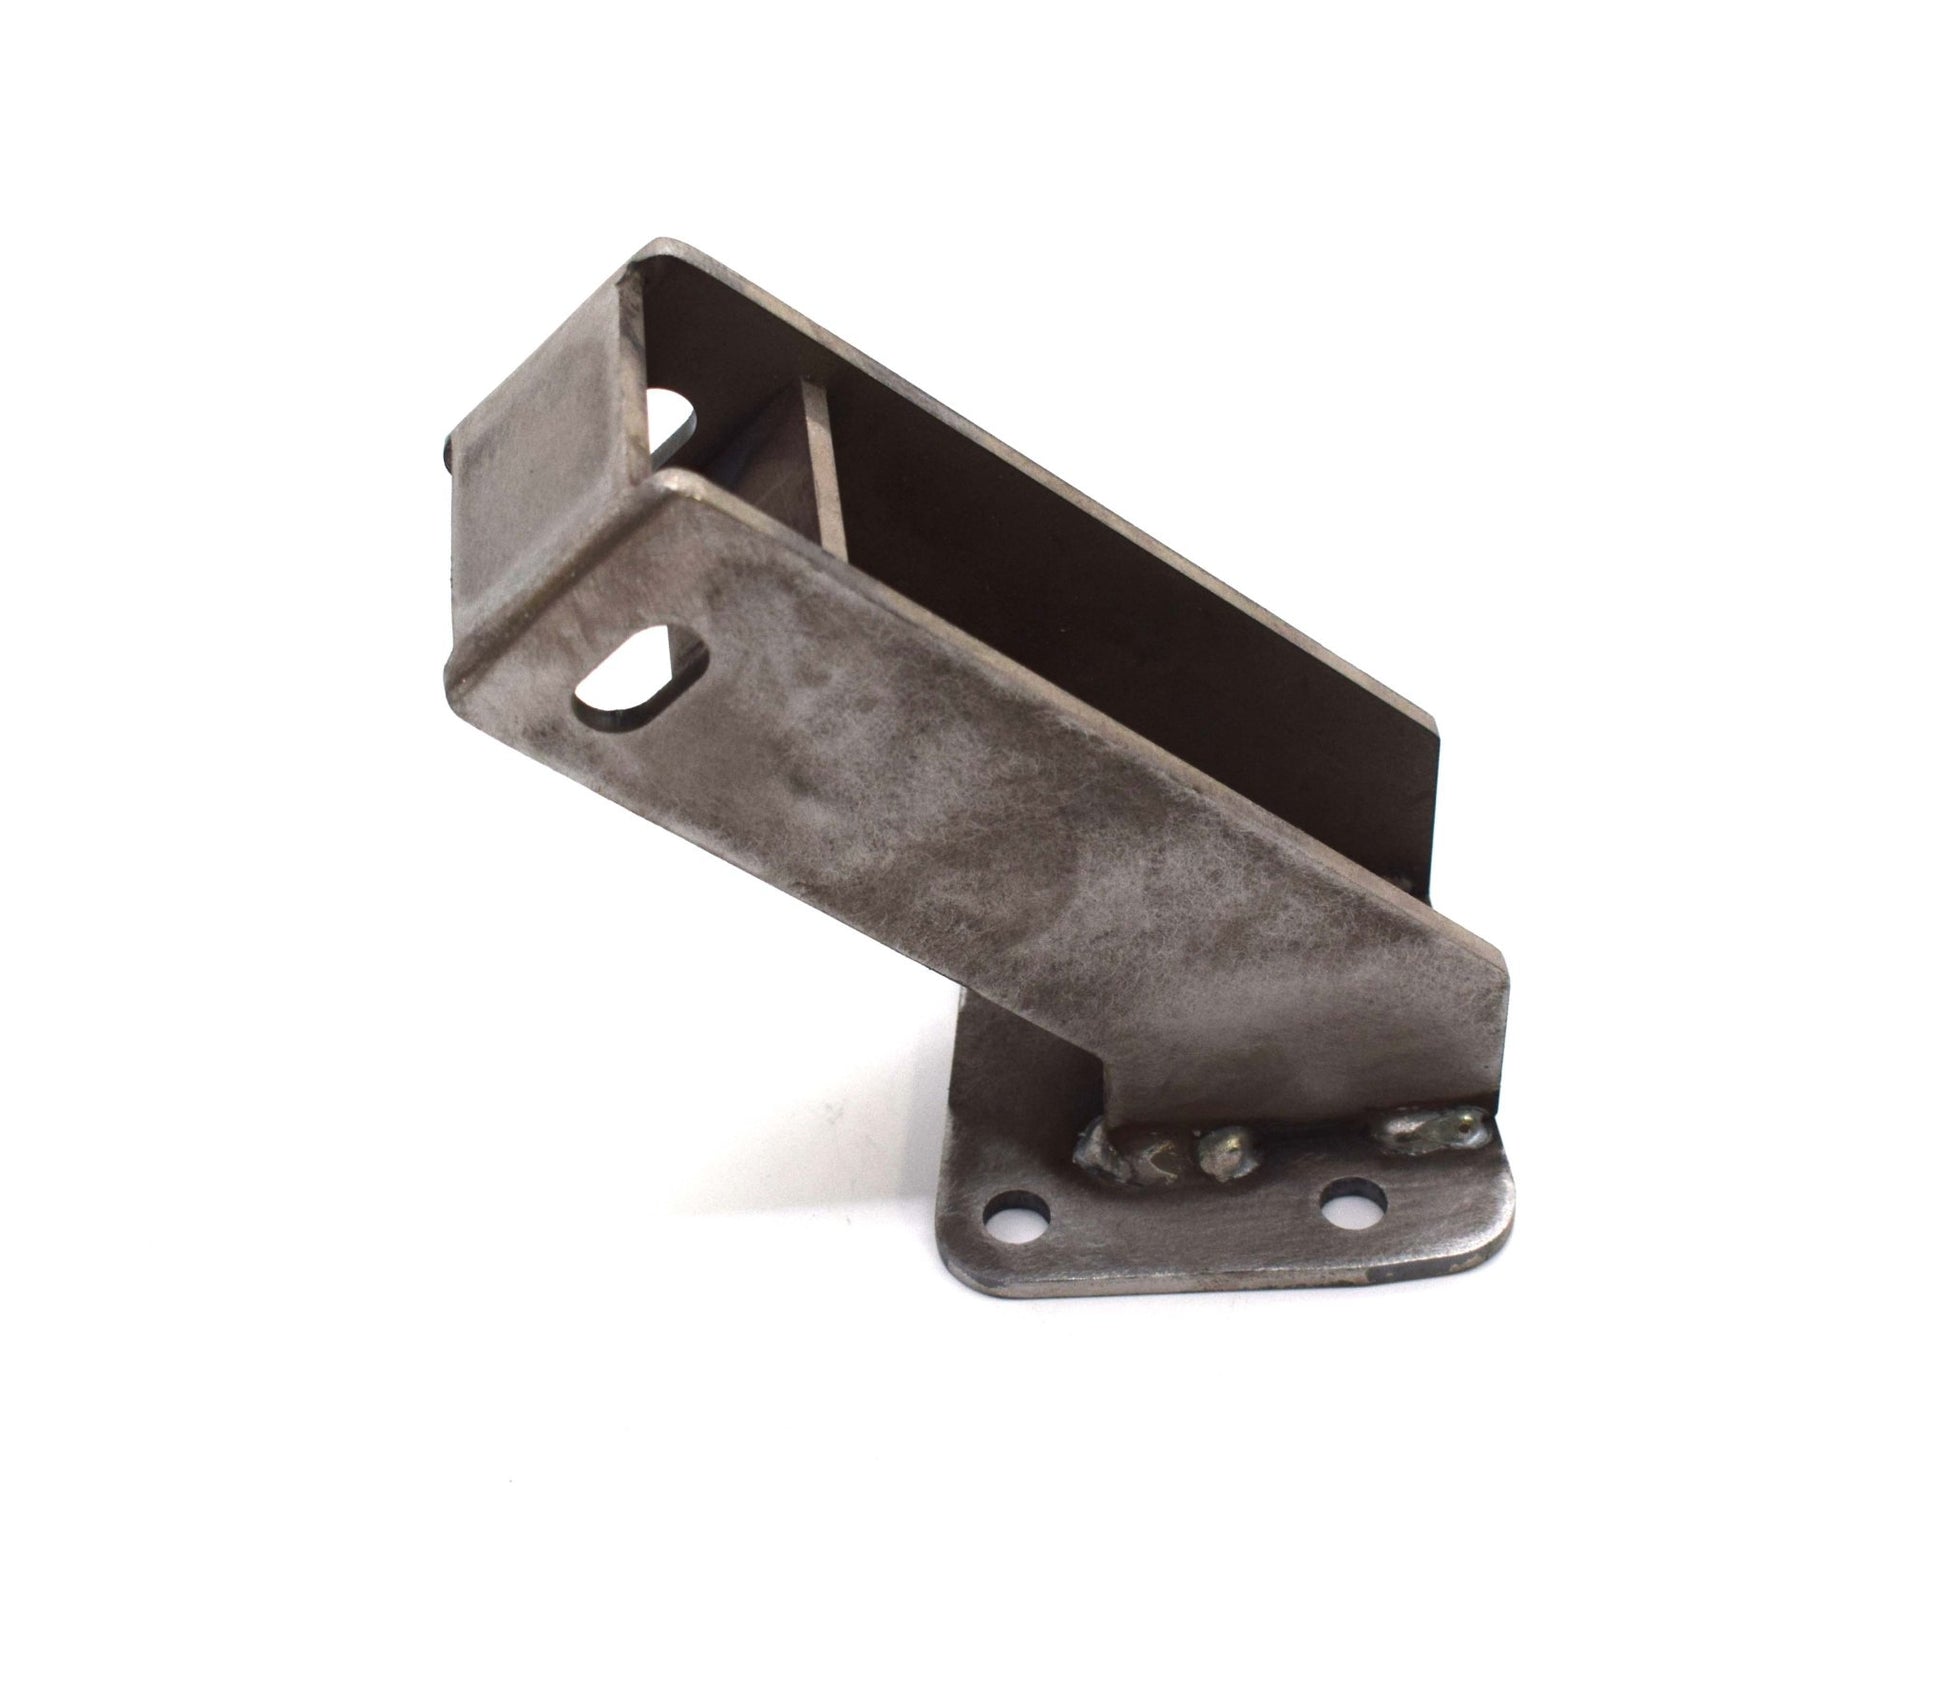 Engine Frame Mount For Saginaw Style Steering, Driver Side, Jeepster Commando - The JeepsterMan